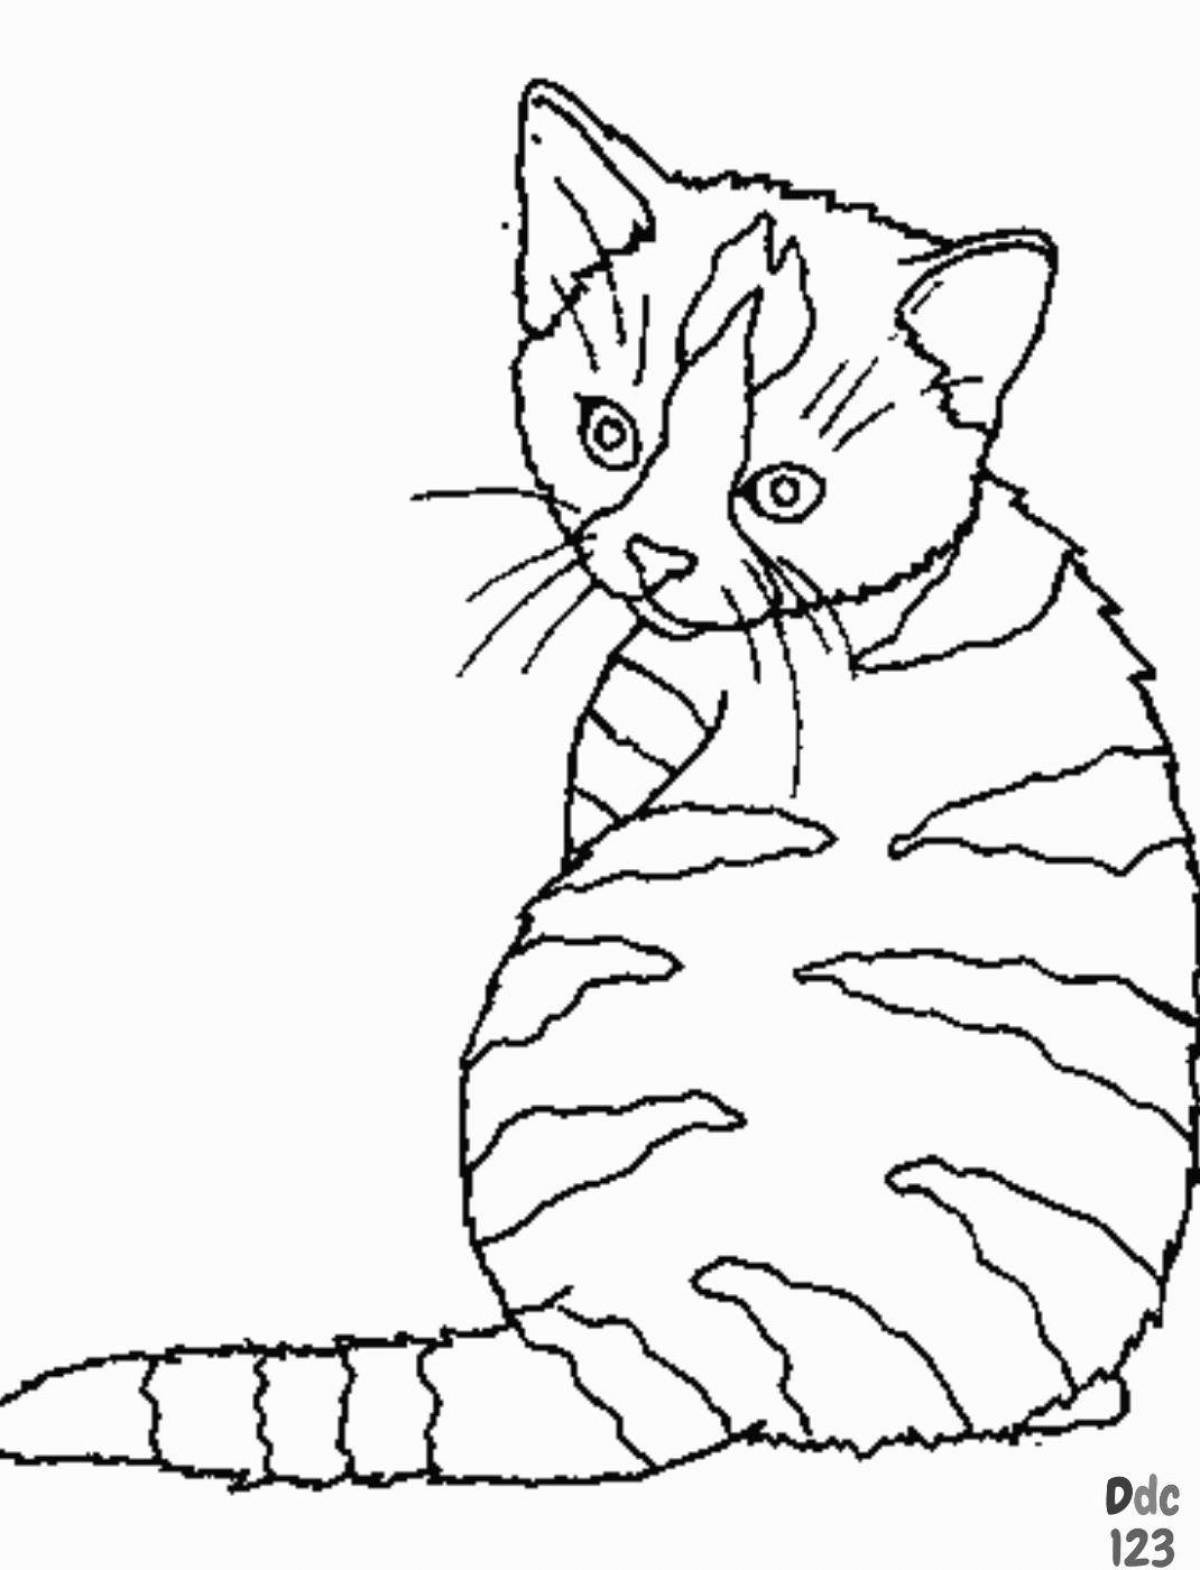 Coloring page graceful tabby cat